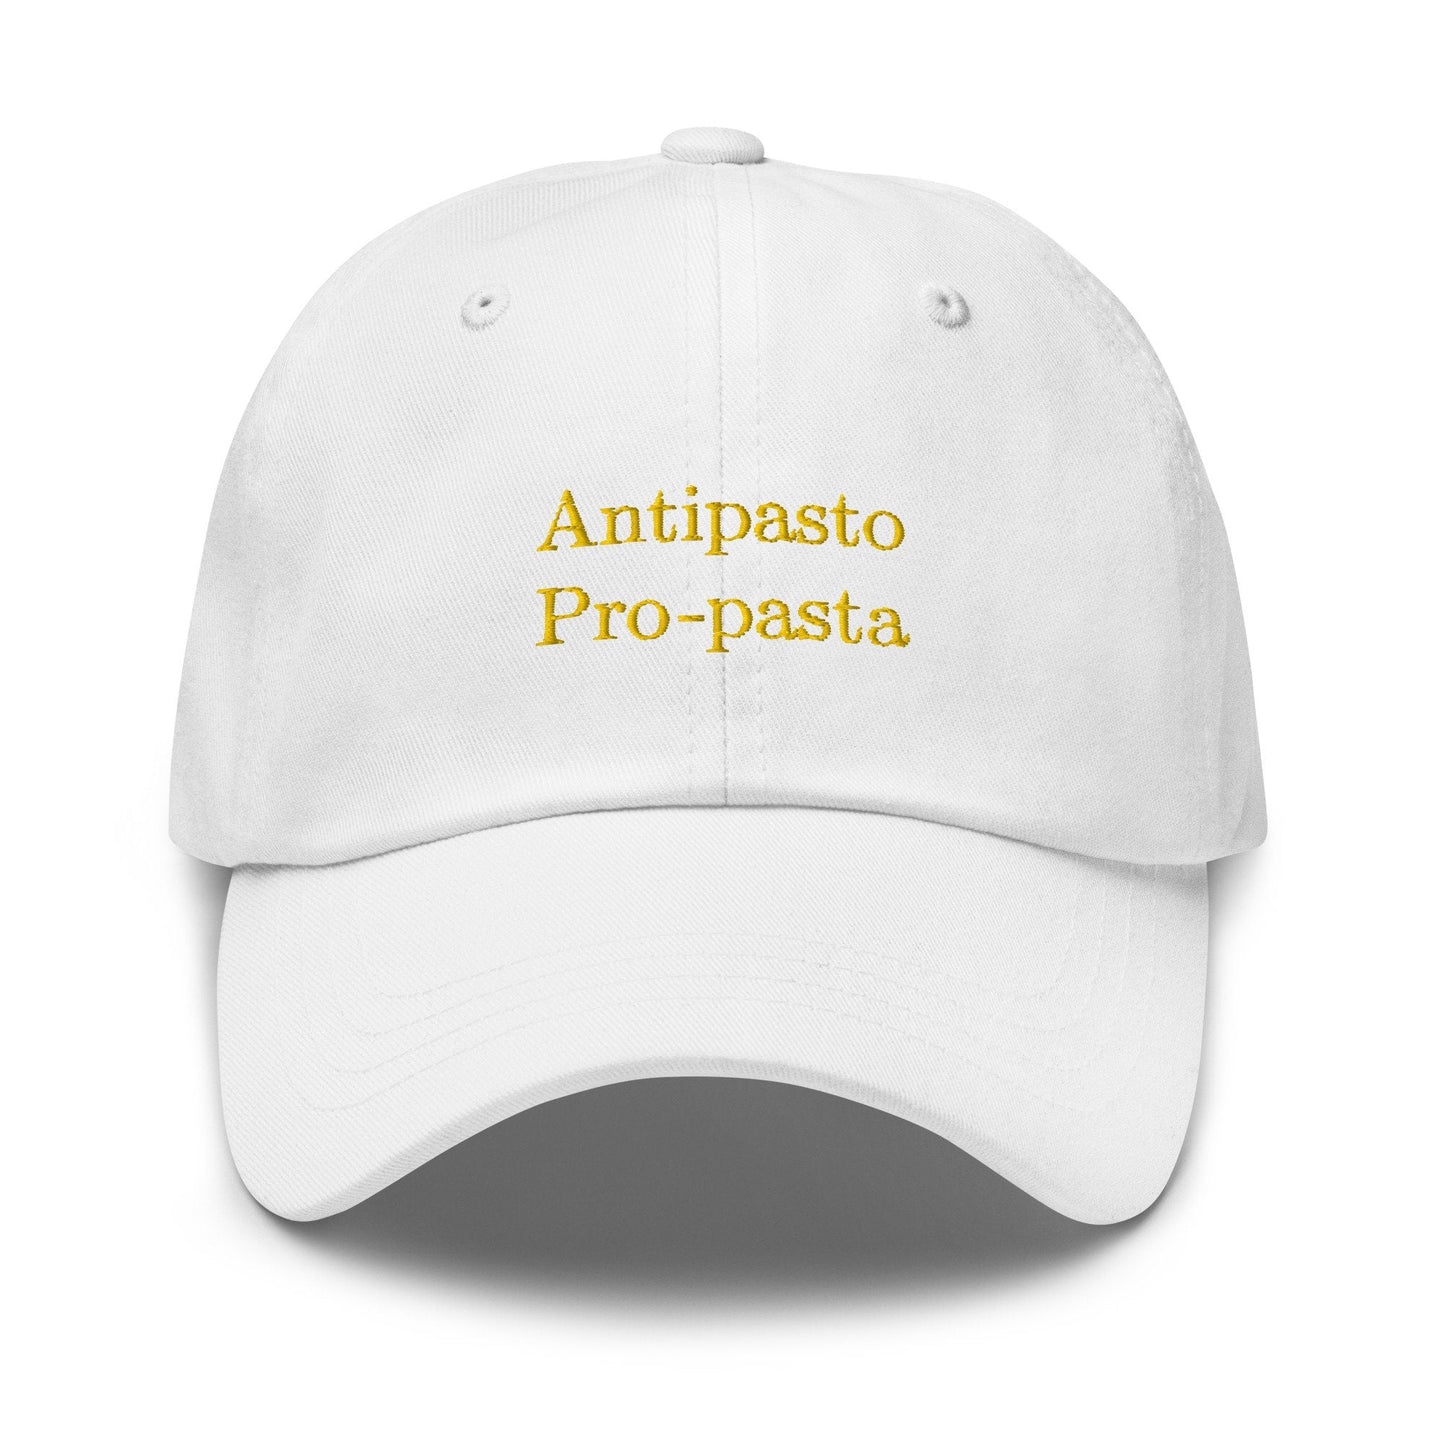 Pasta Dad Hat - The Duality of Man - Funny Foodie Gift - Antipasto, Pasta, and Italian Food Lovers - Embroidered Cap - Multiple Colors - Evilwater Originals